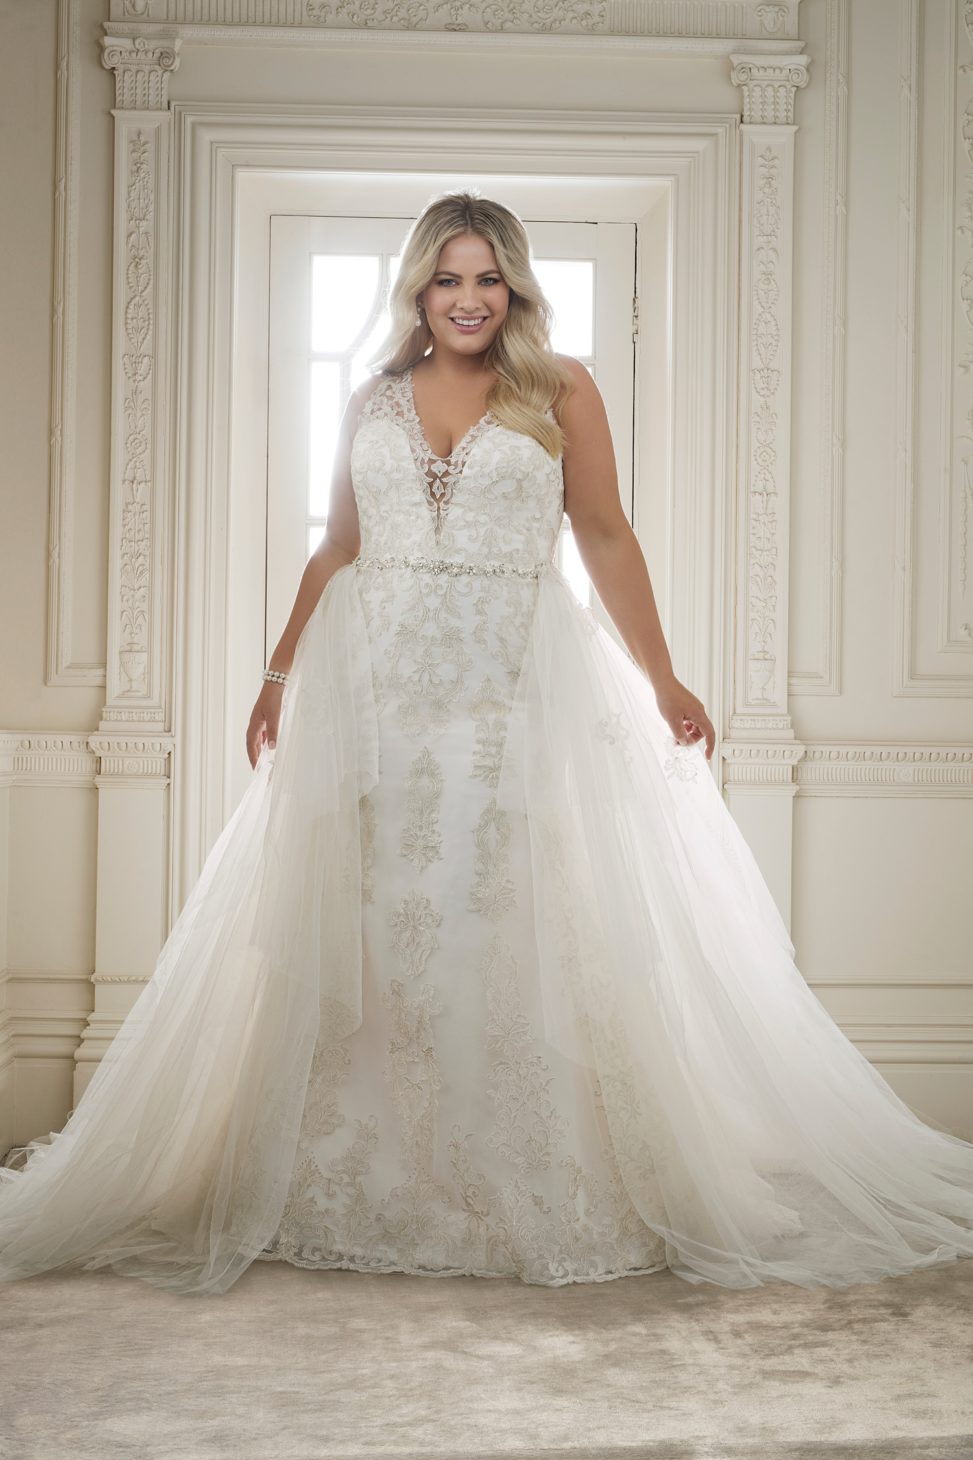 Wedding Dress Sophia Tolli Y11883 "Olympia", available in sizes 0-28